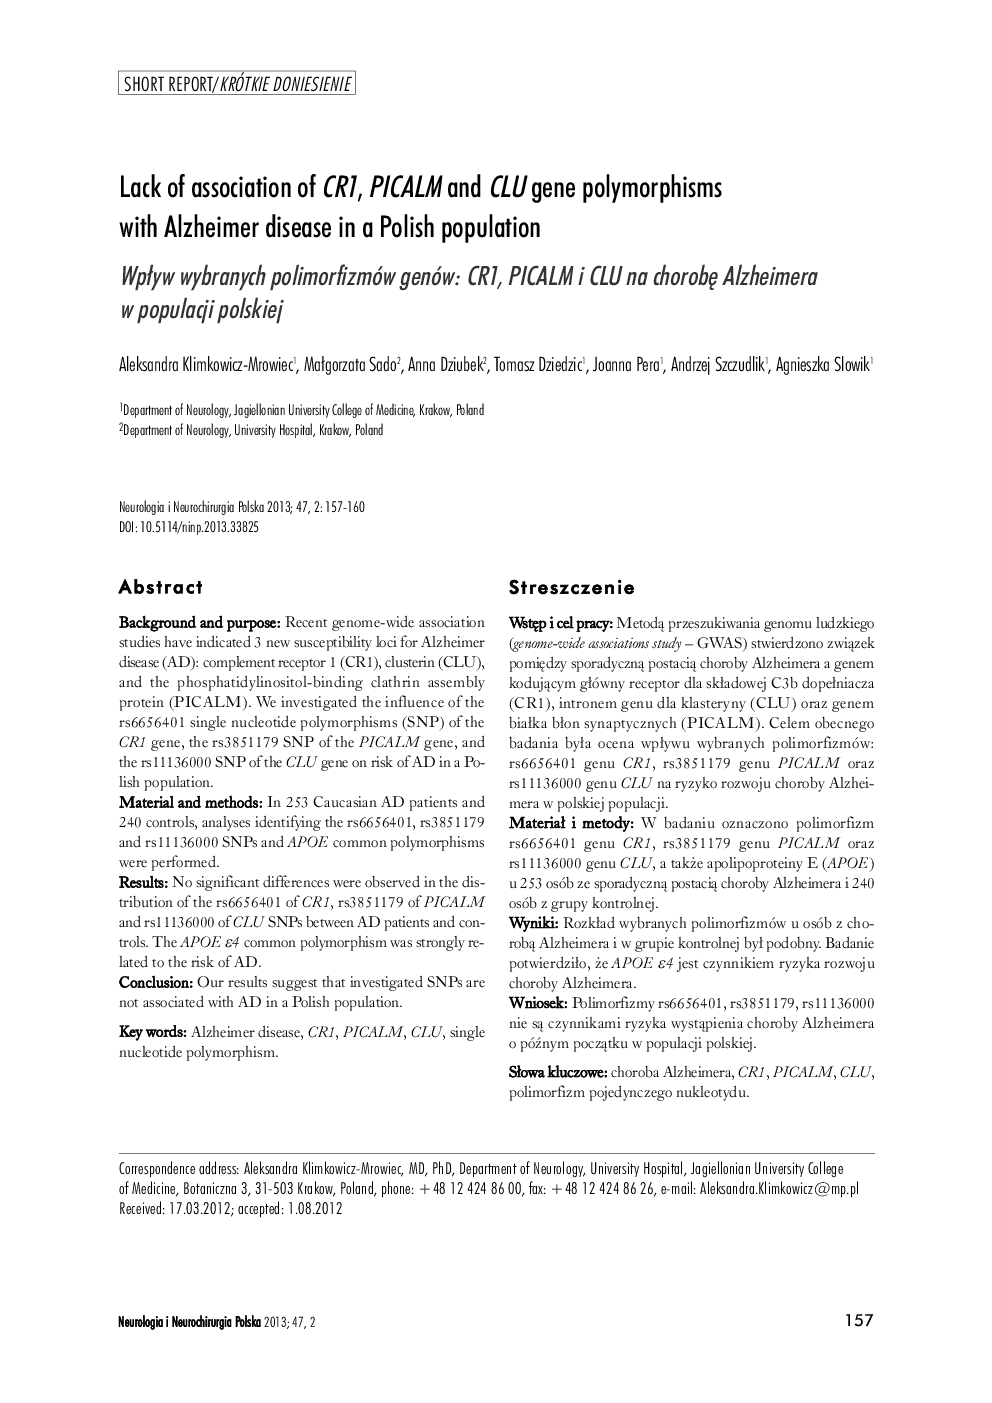 Lack of association of CR1, PICALM and CLU gene polymorphisms with Alzheimer disease in a Polish population